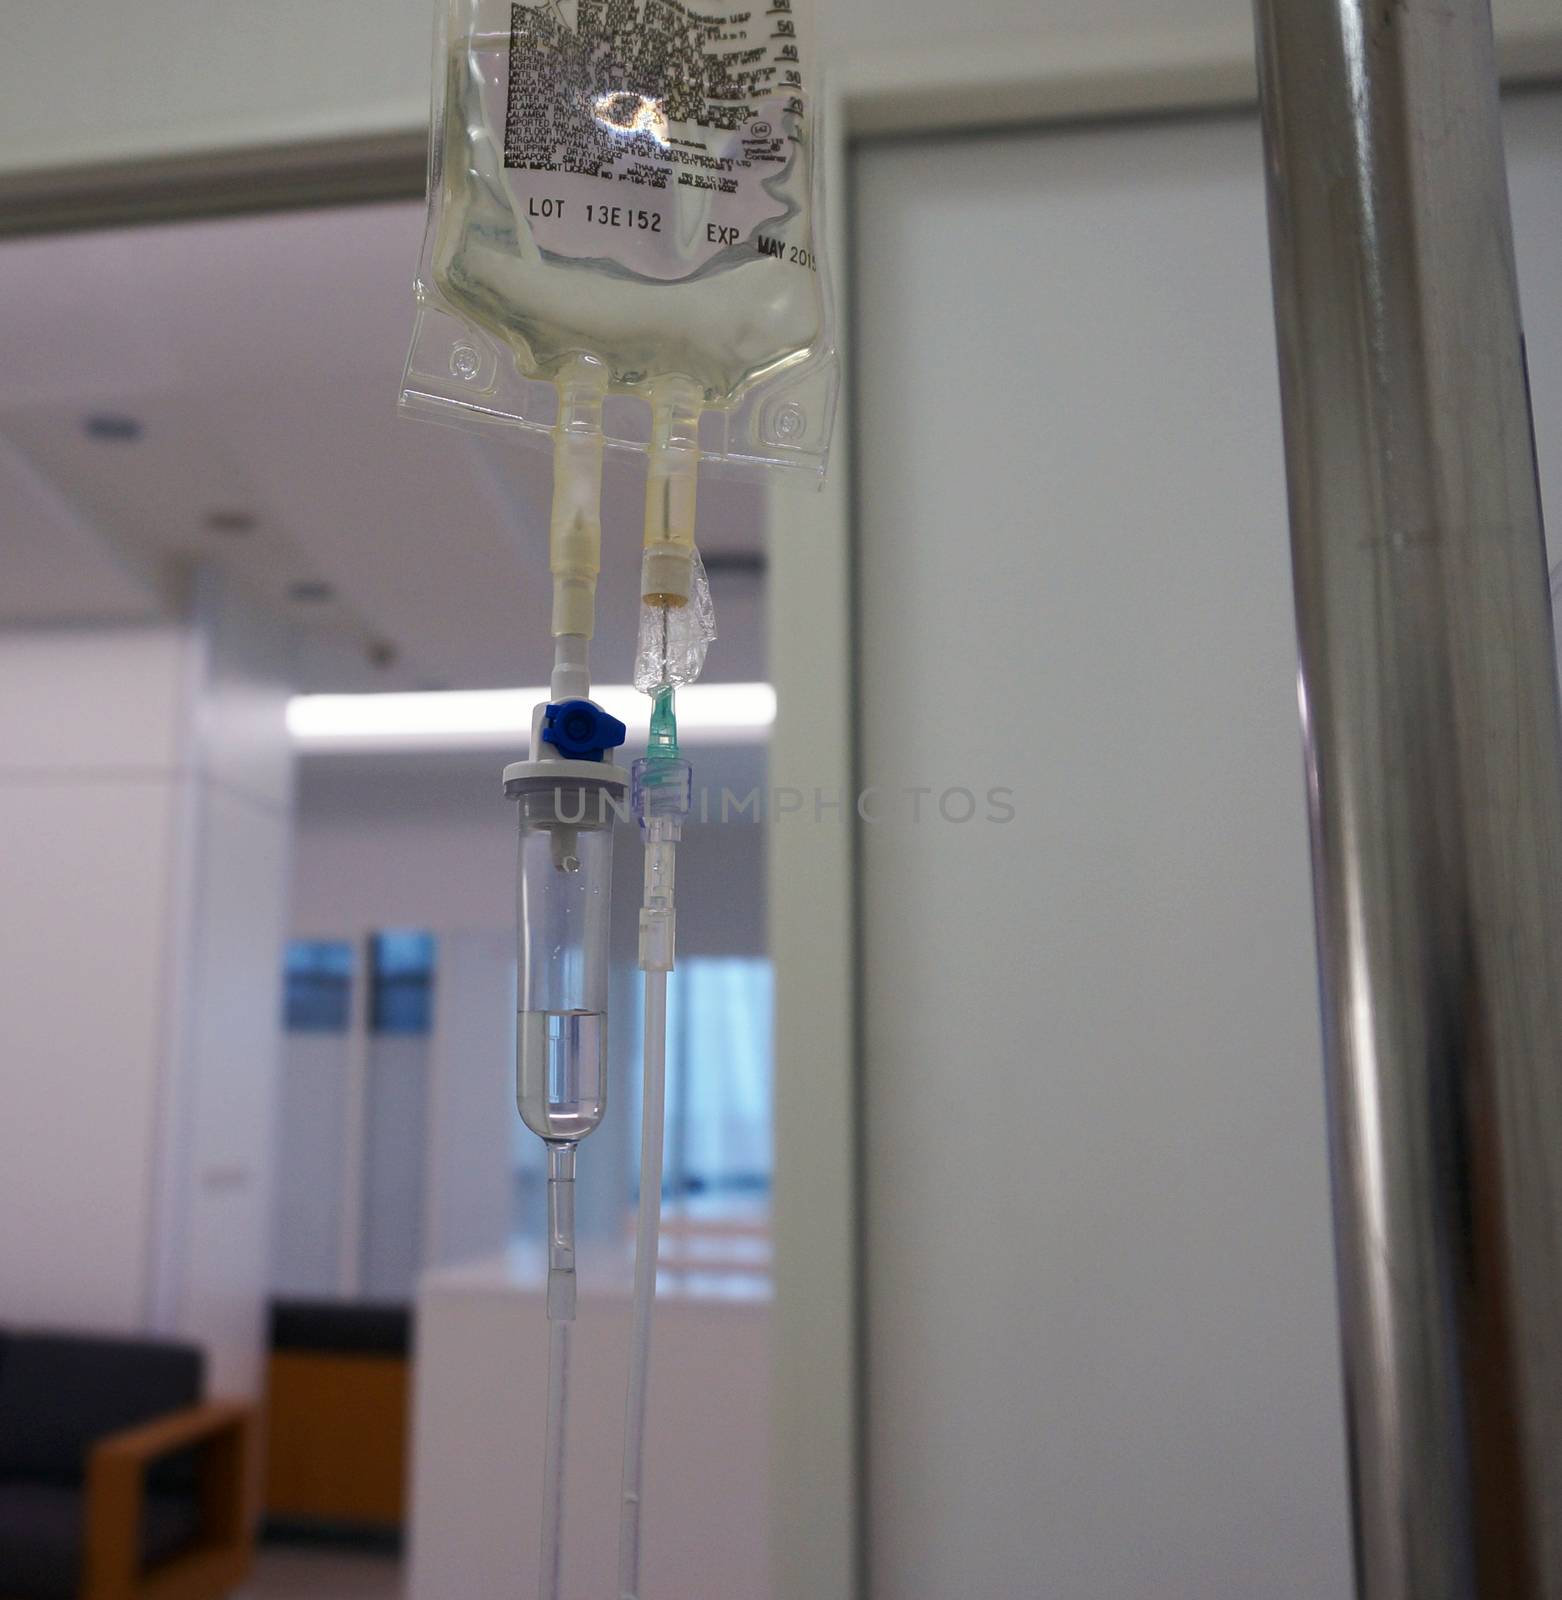 Intravenous fluid for patients in the patient rooms in the hospital.                               